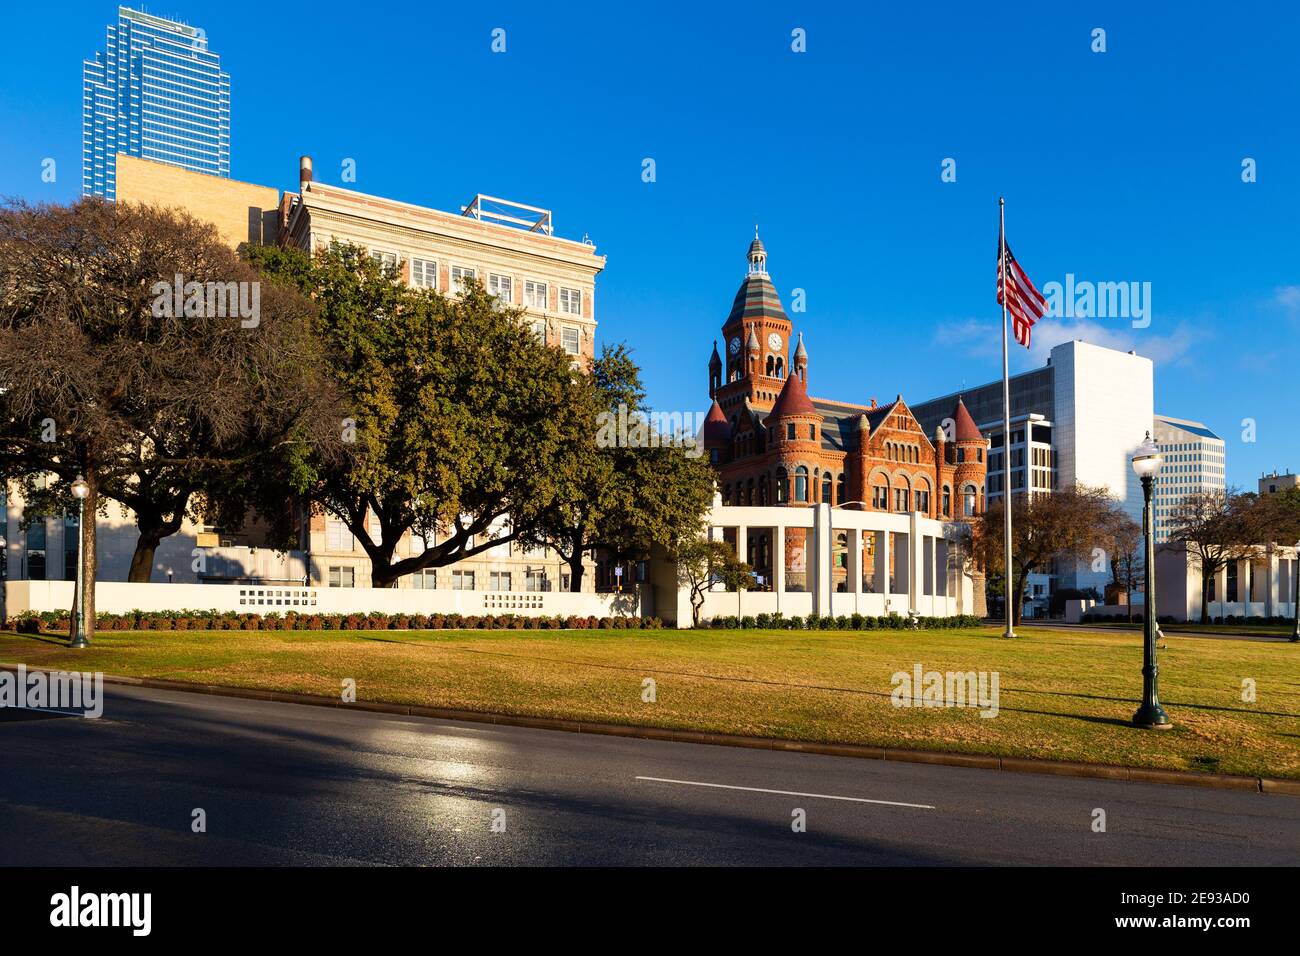 Dealey Plaza, city park inside Elm Street in Dallas, Texas. Site of Kennedy assassination in 1963. Stock Photo